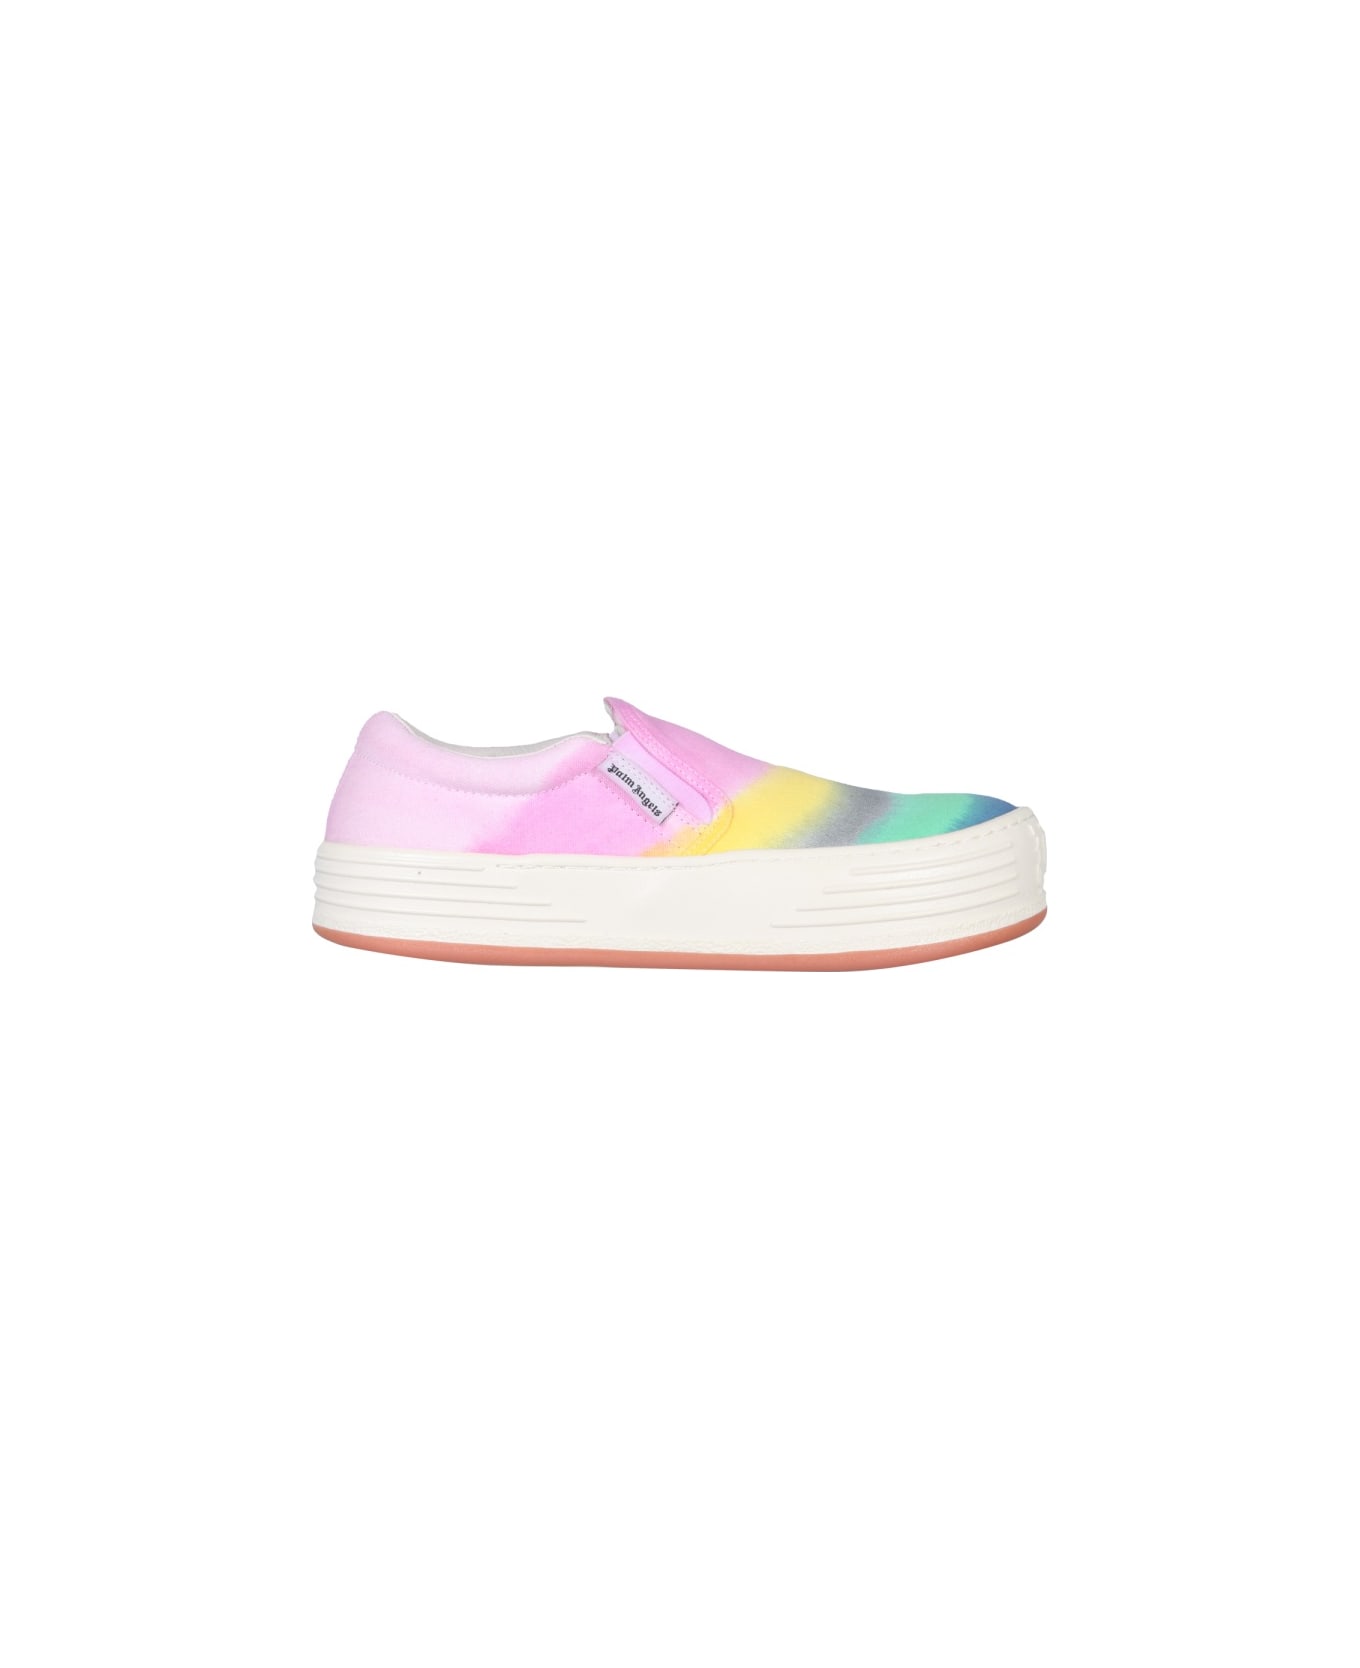 Palm Angels Suede Slip-on - MULTICOLOUR